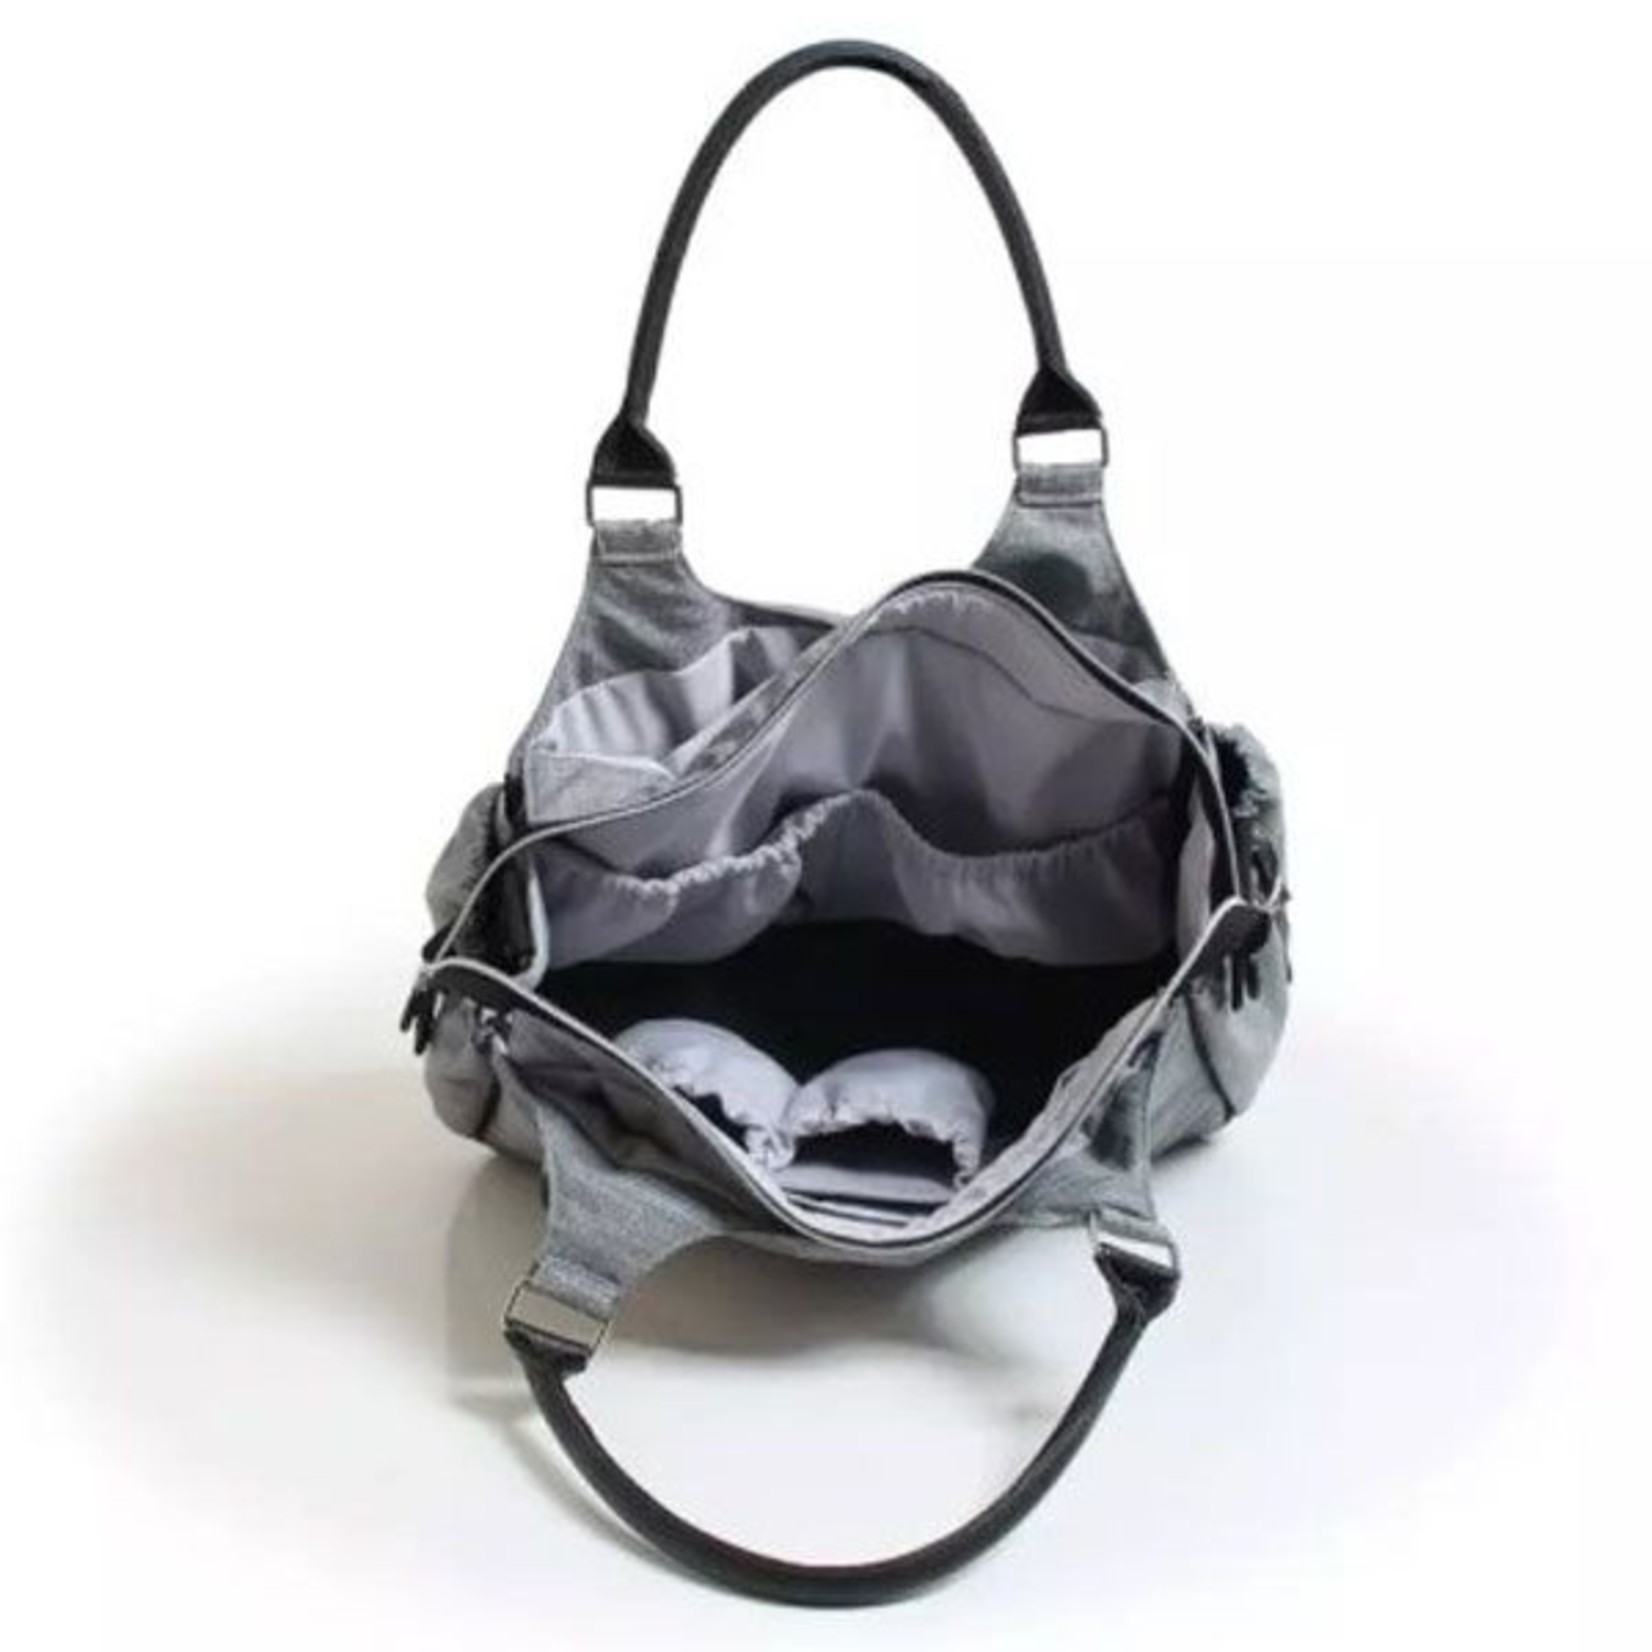 Valco Baby Mothers Bag-Grey Marle